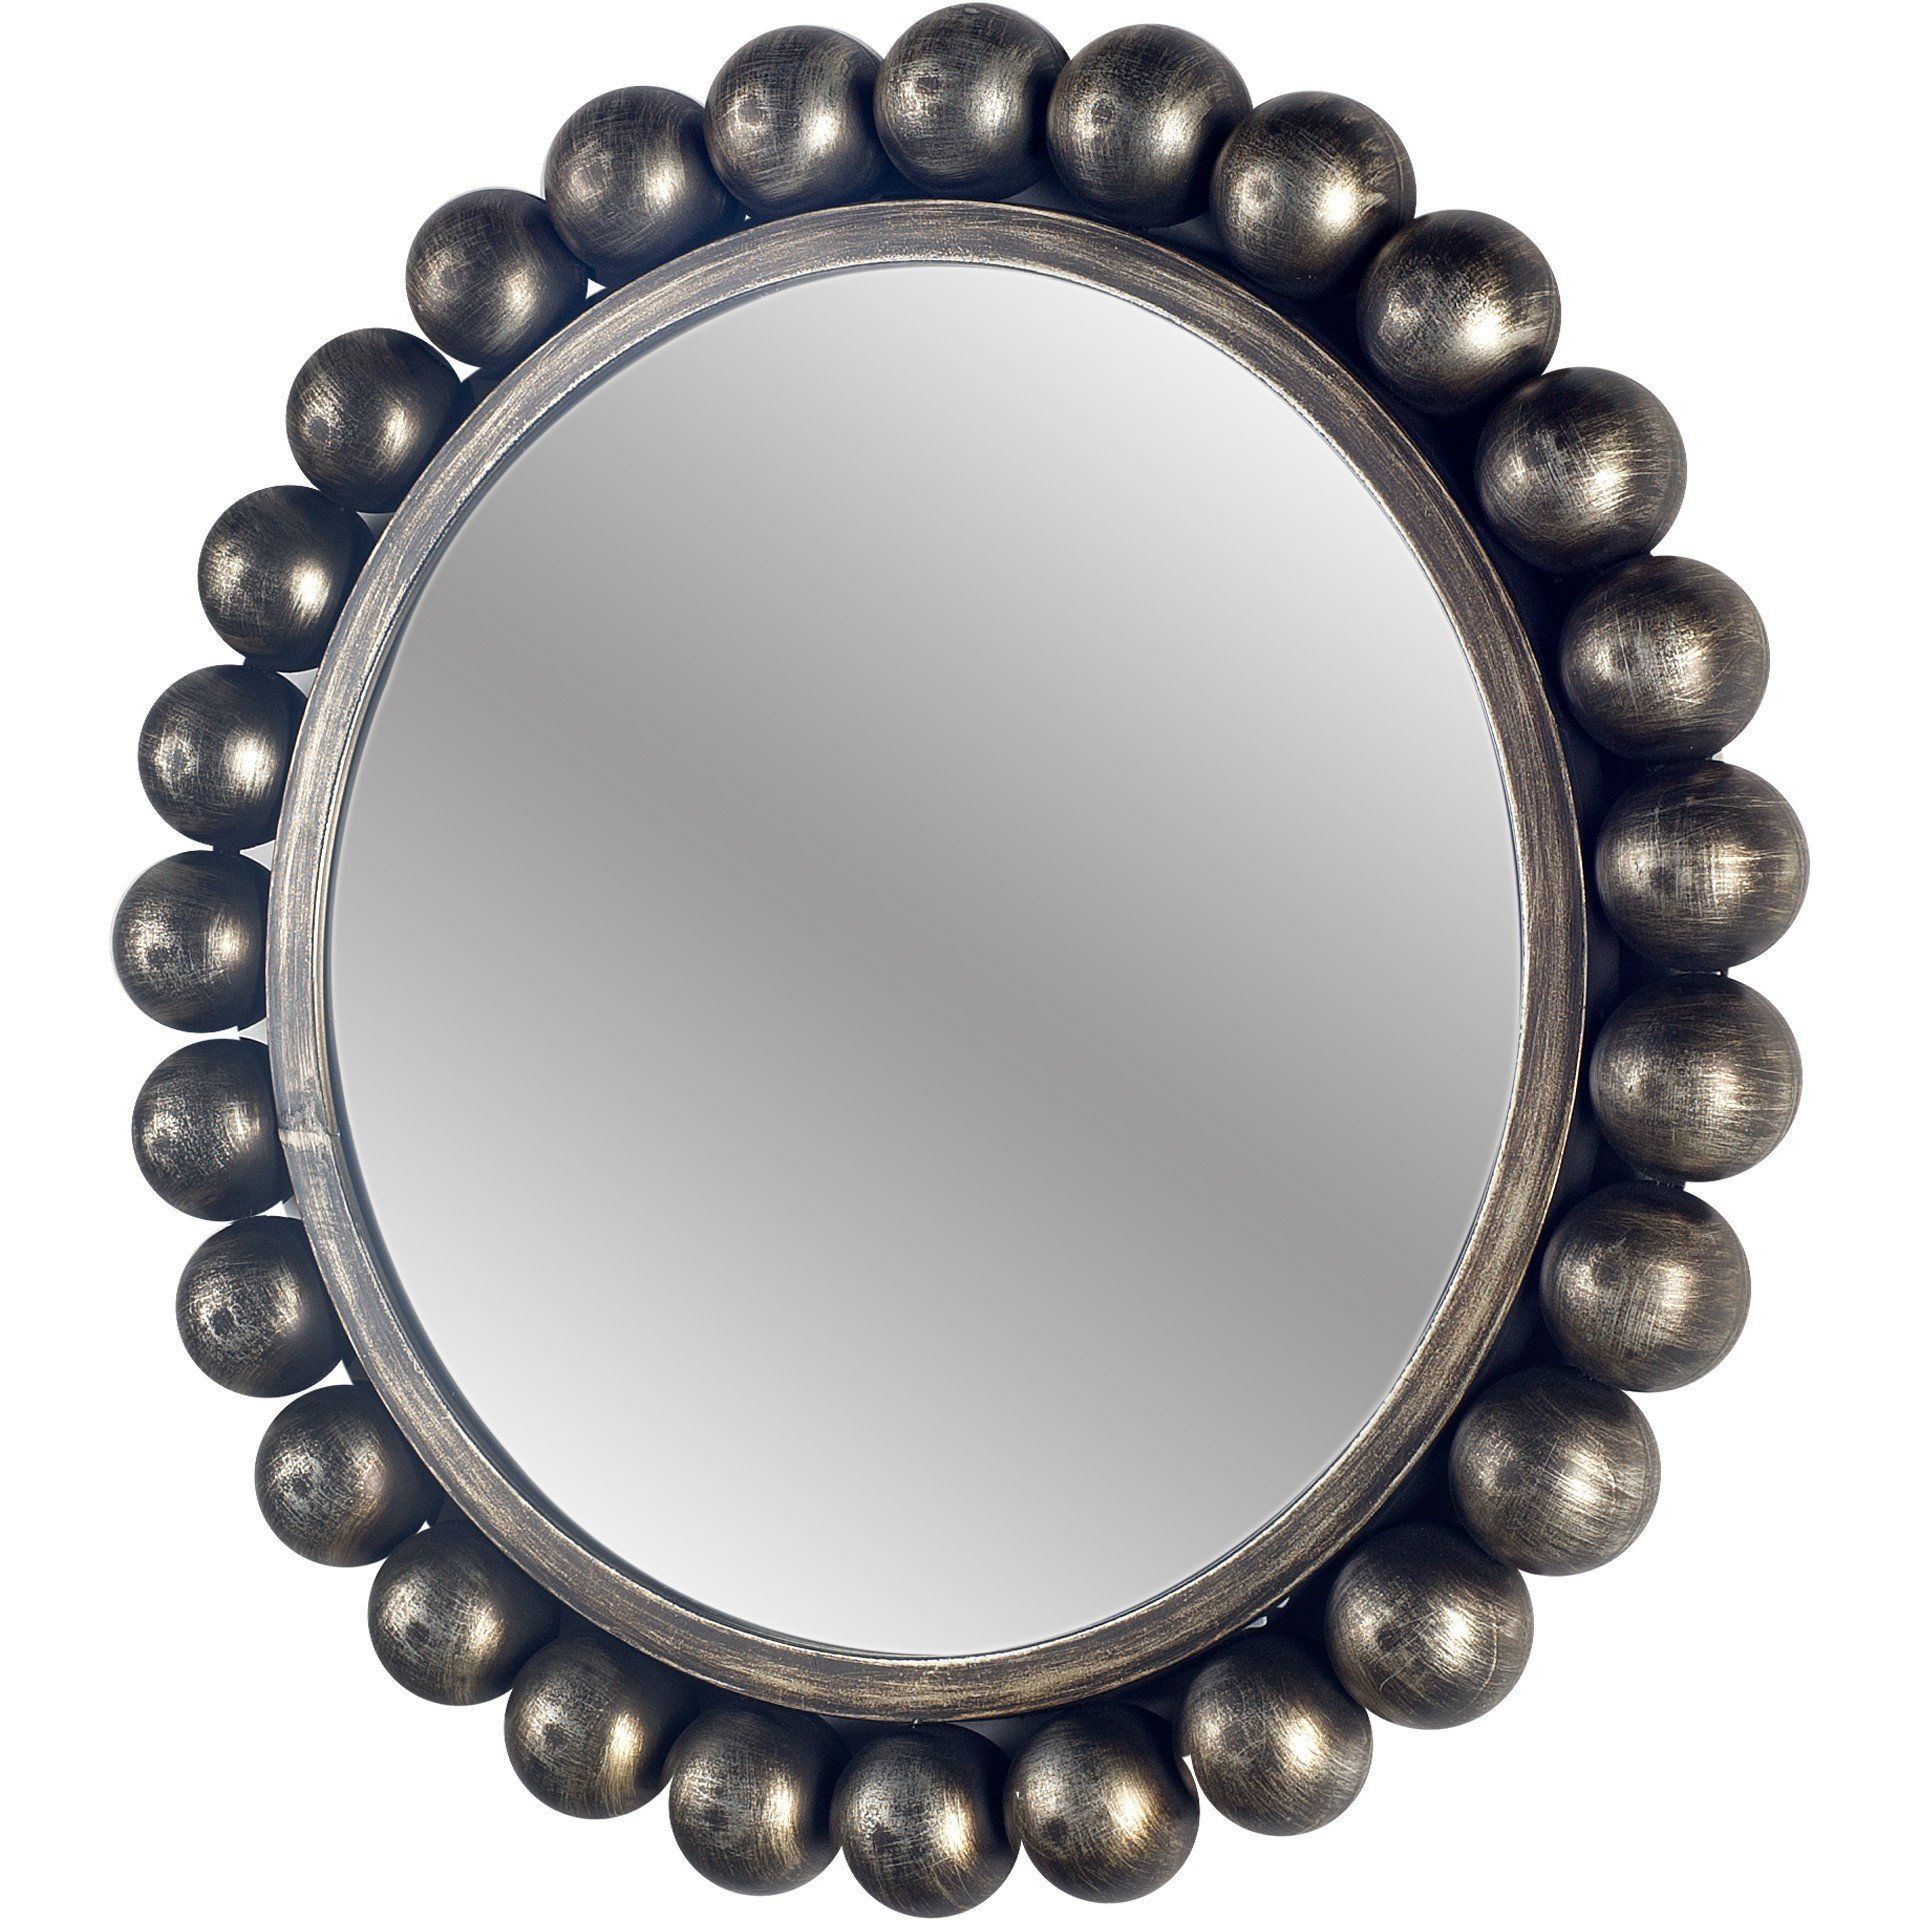 Black Wall Mirrors You'll Love In 2019 | Wayfair With Regard To Derick Accent Mirrors (View 5 of 30)